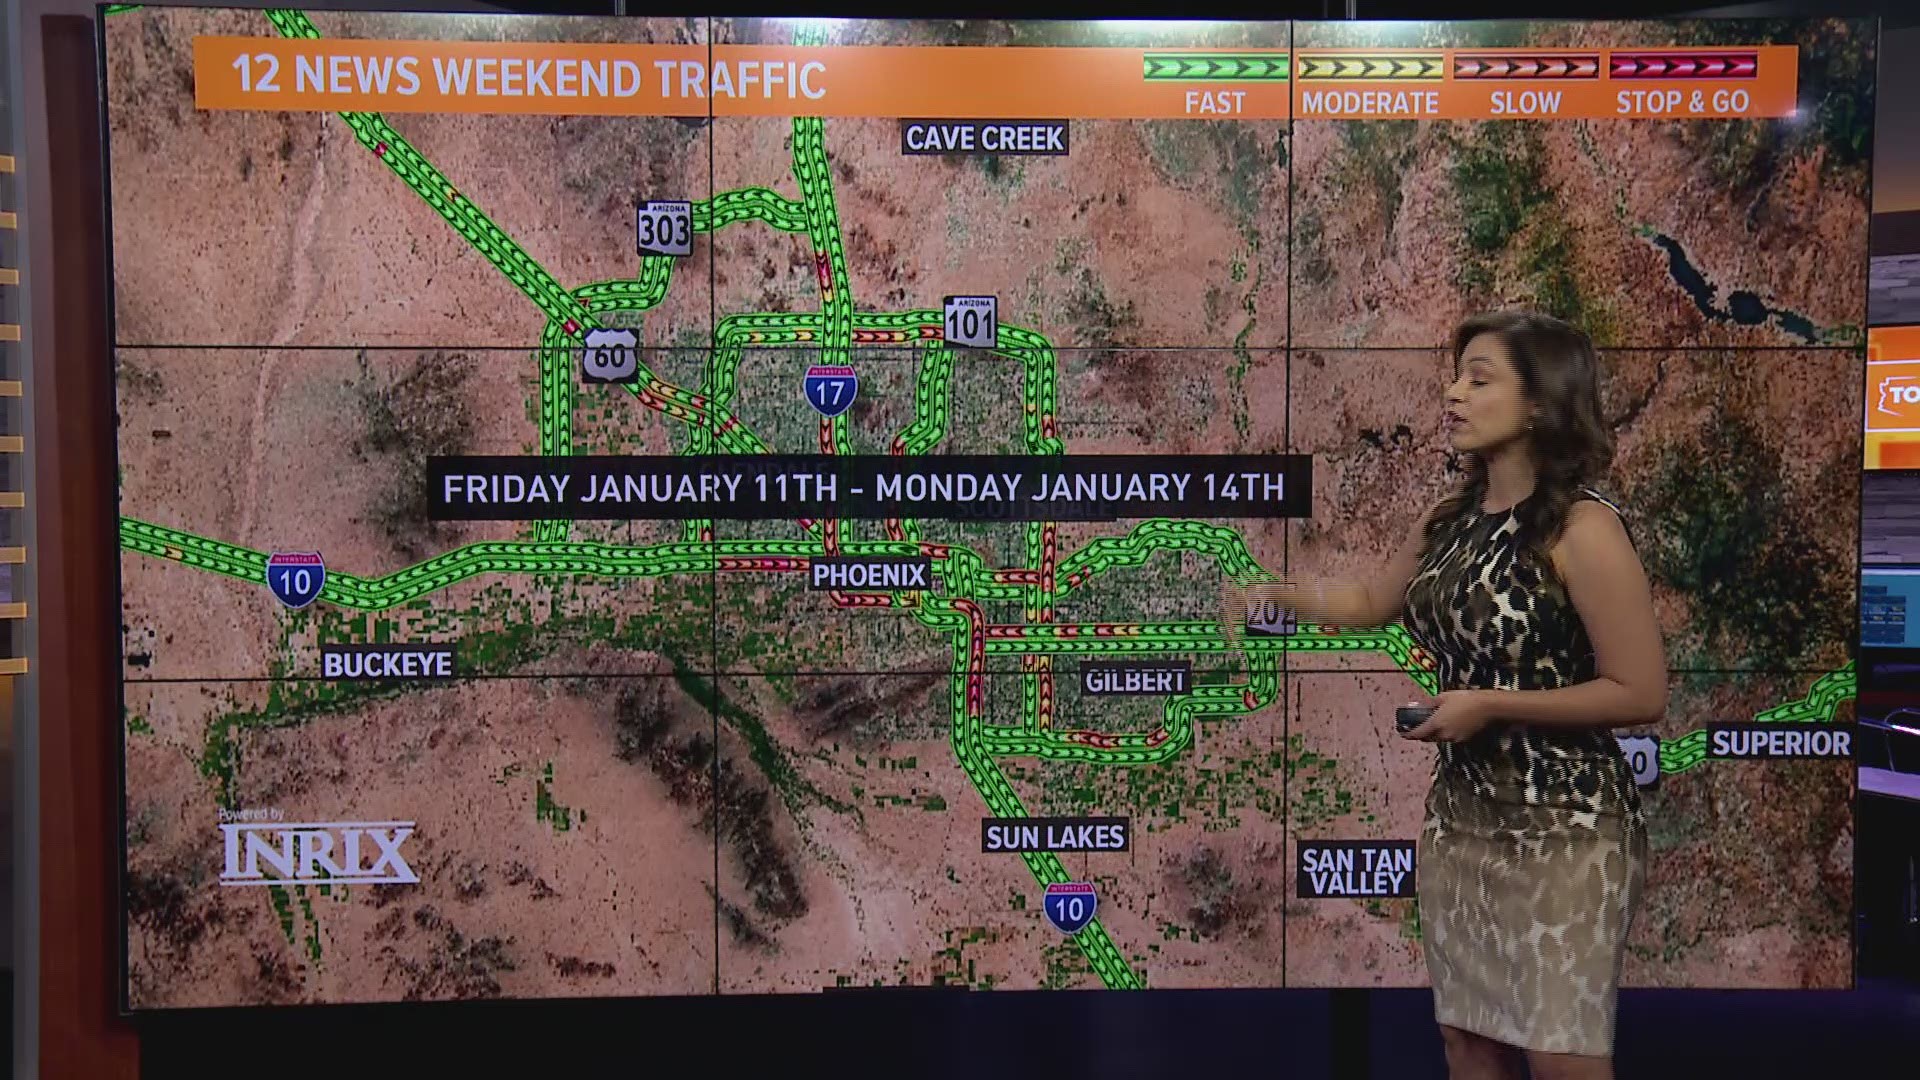 Vanessa Ramirez describes the traffic restrictions for the Phoenix area for this weekend, Jan. 11 to 13.